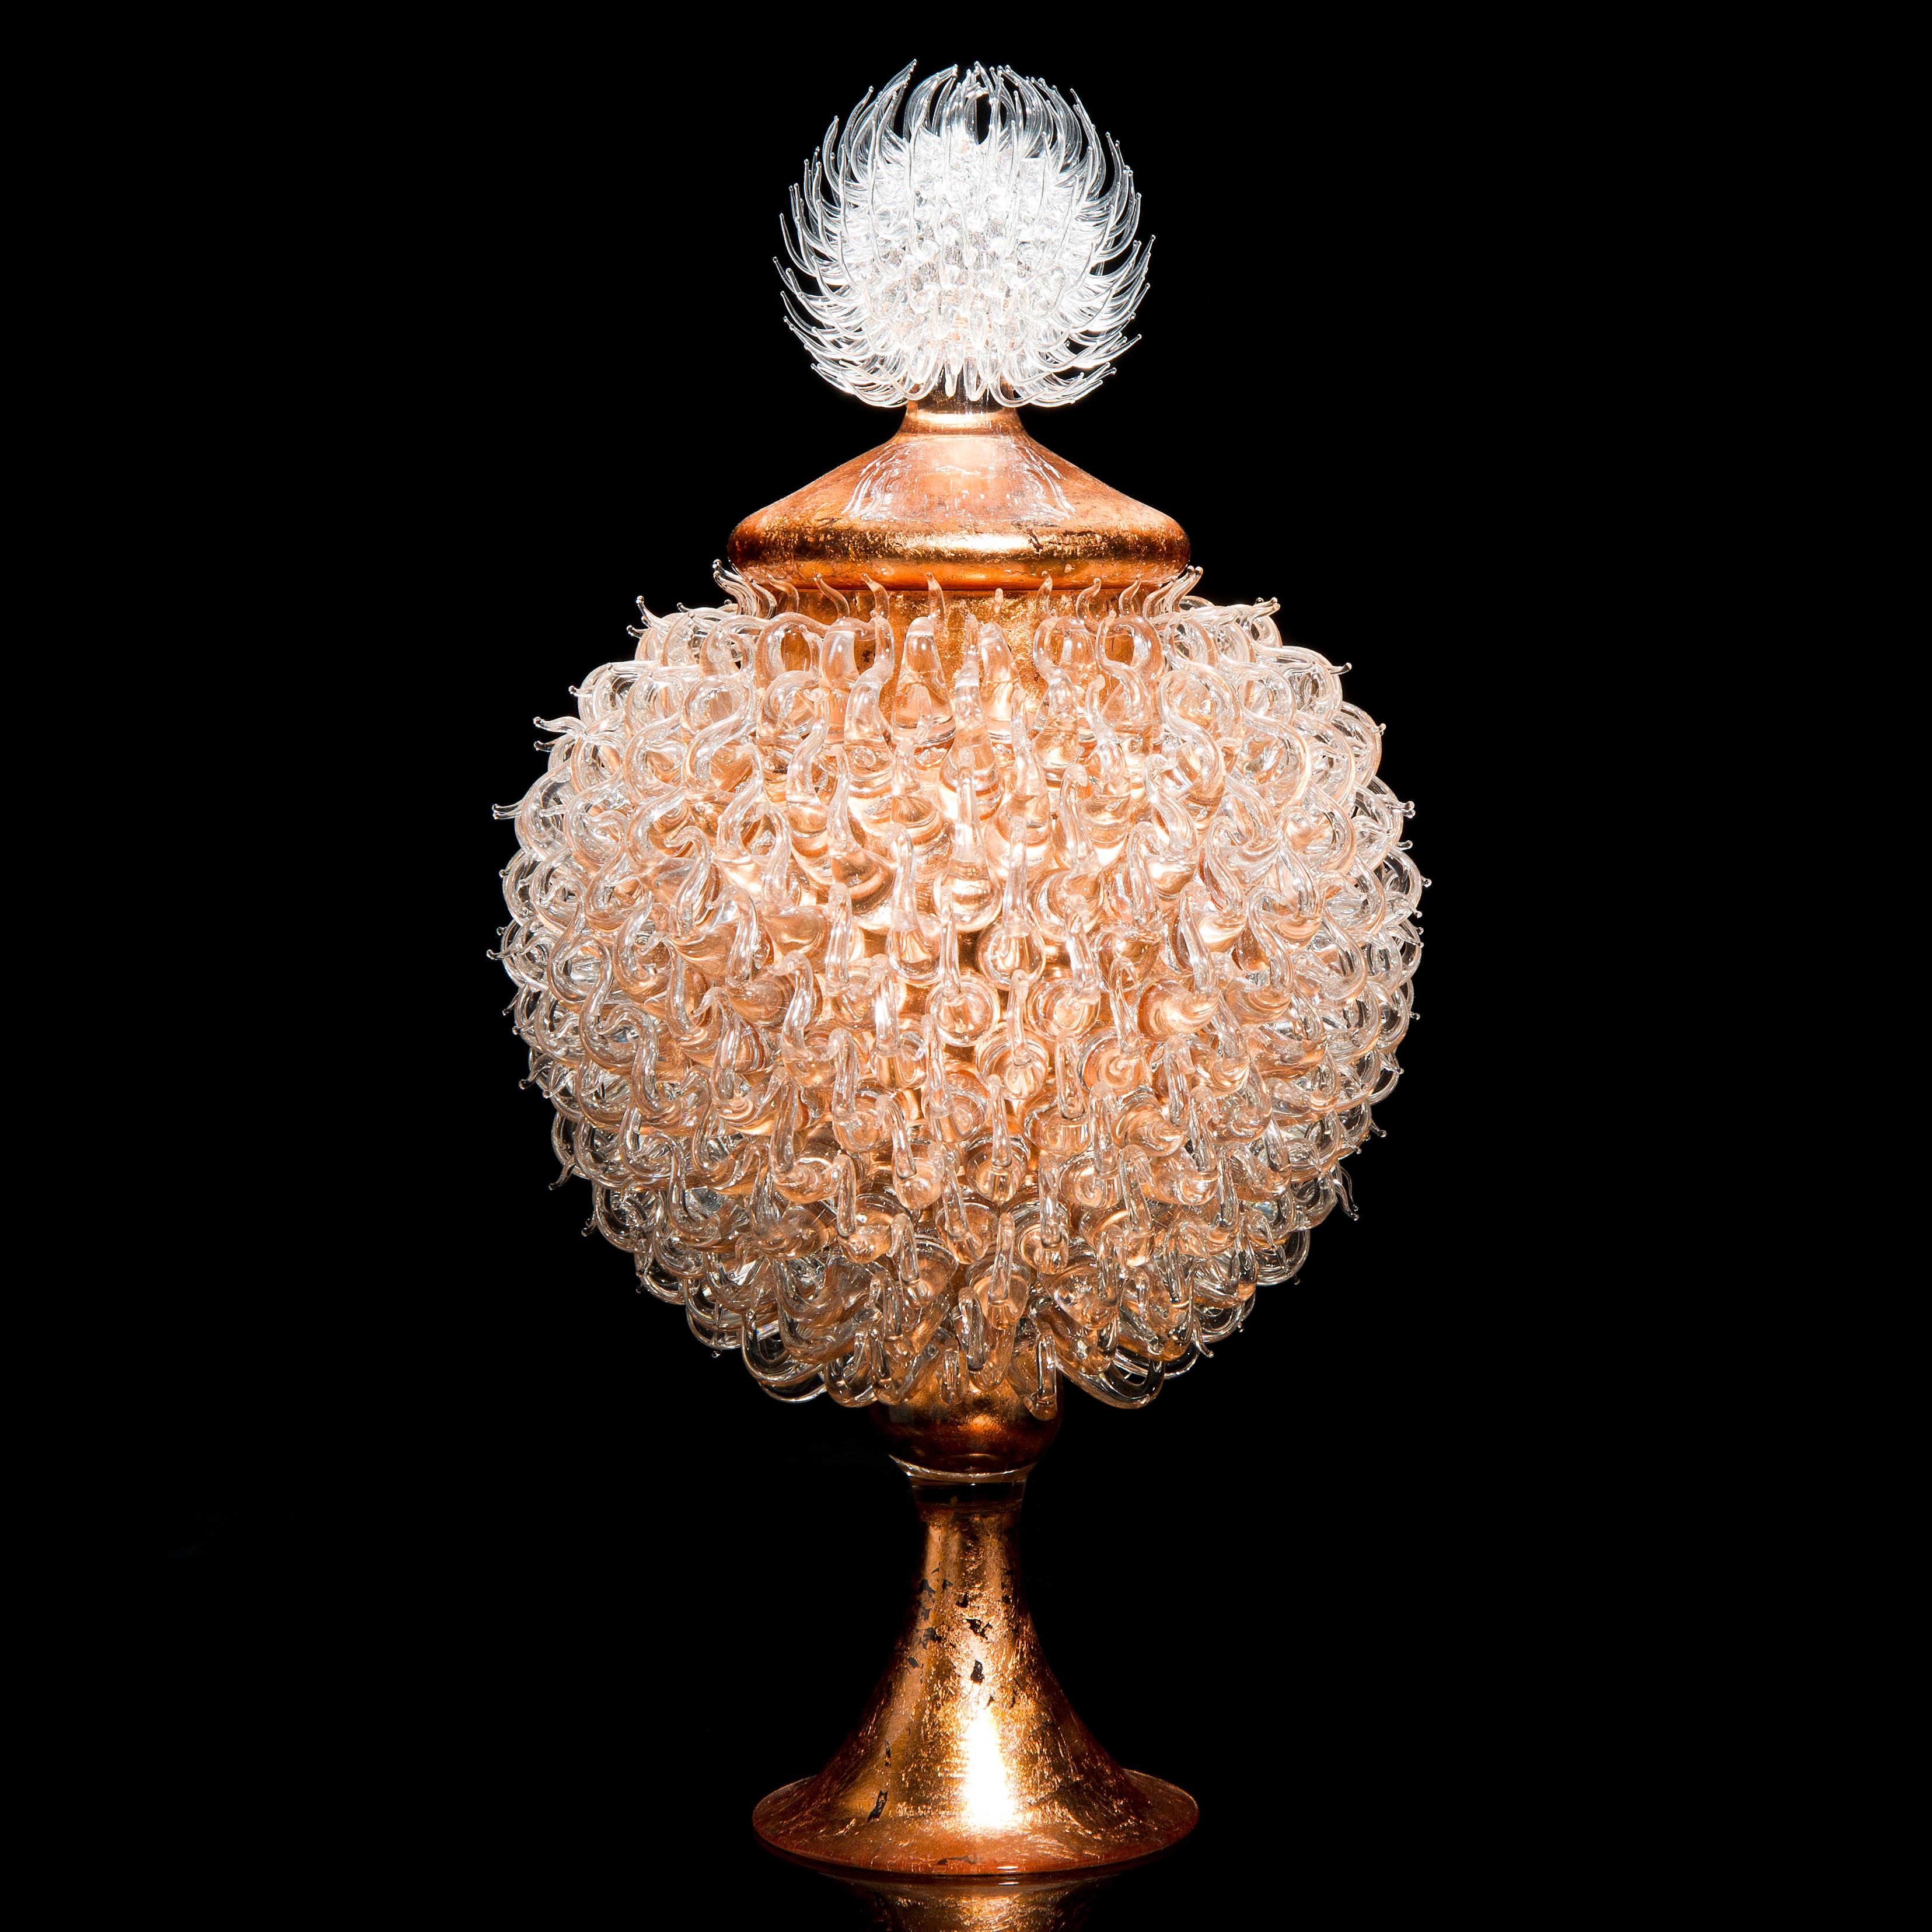 Round Venus jar with thistle top is a unique glass and copper artwork by the British glass artist James Lethbridge. Blown glass with copper leaf gilding on the inside. The outer layer is covered in handcrafted flame worked decoration and